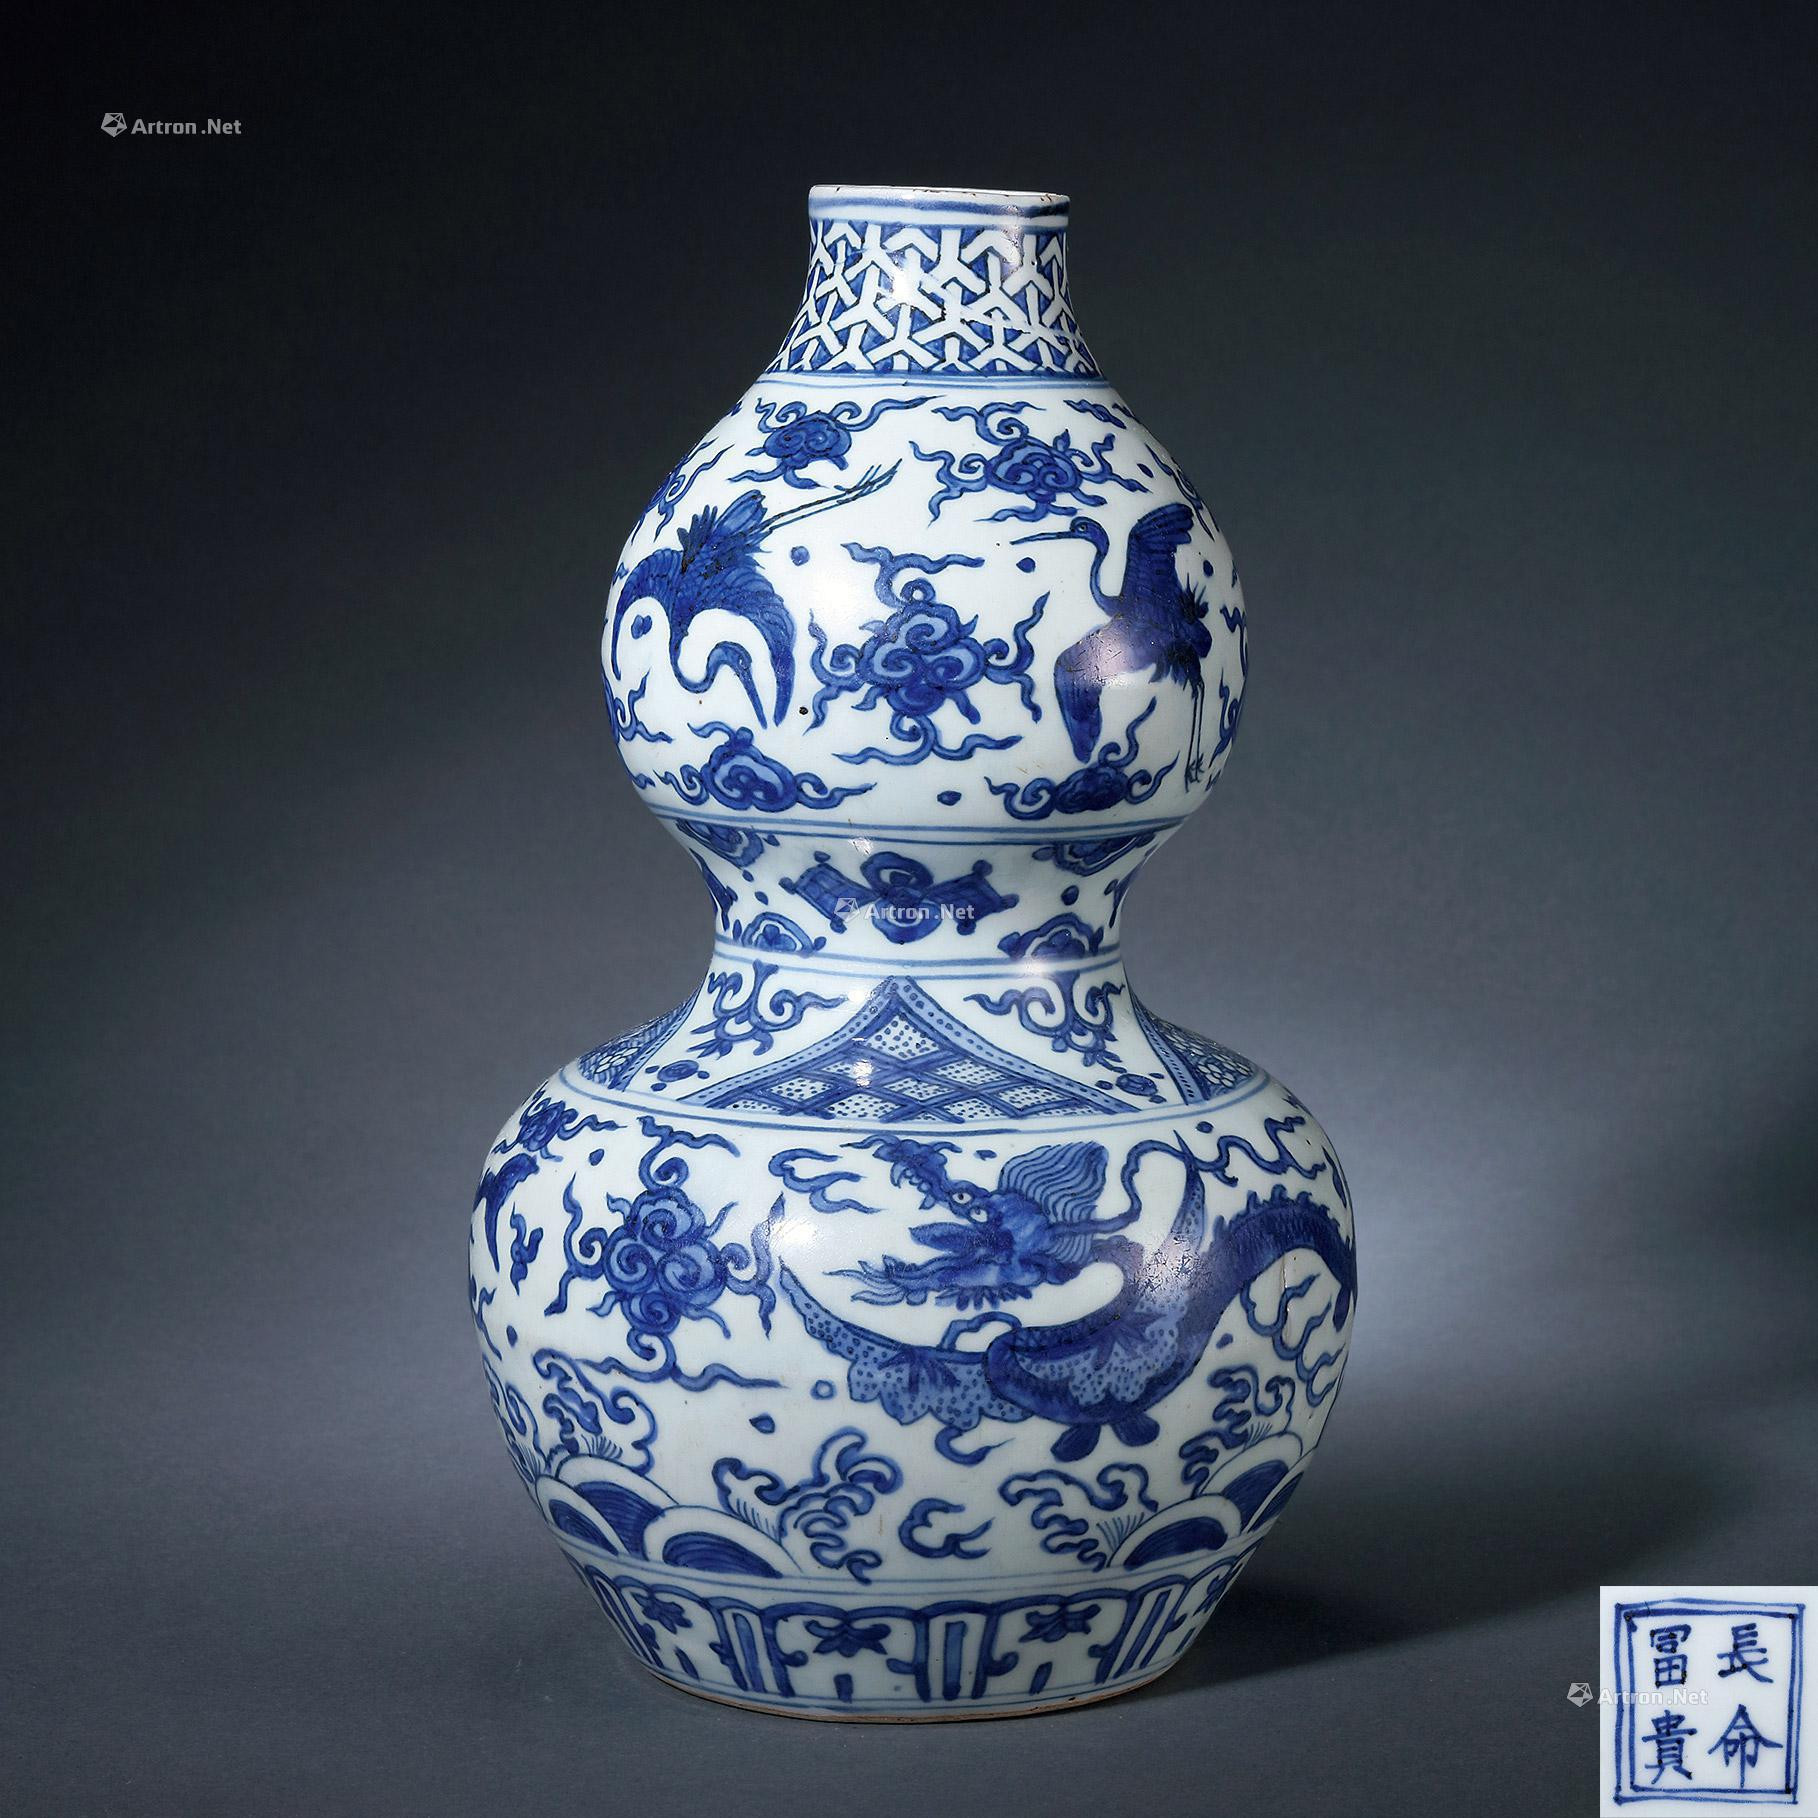 A BLUE AND WHITE CALABASH SHAPED VASE WITH DRAGON DESIGN